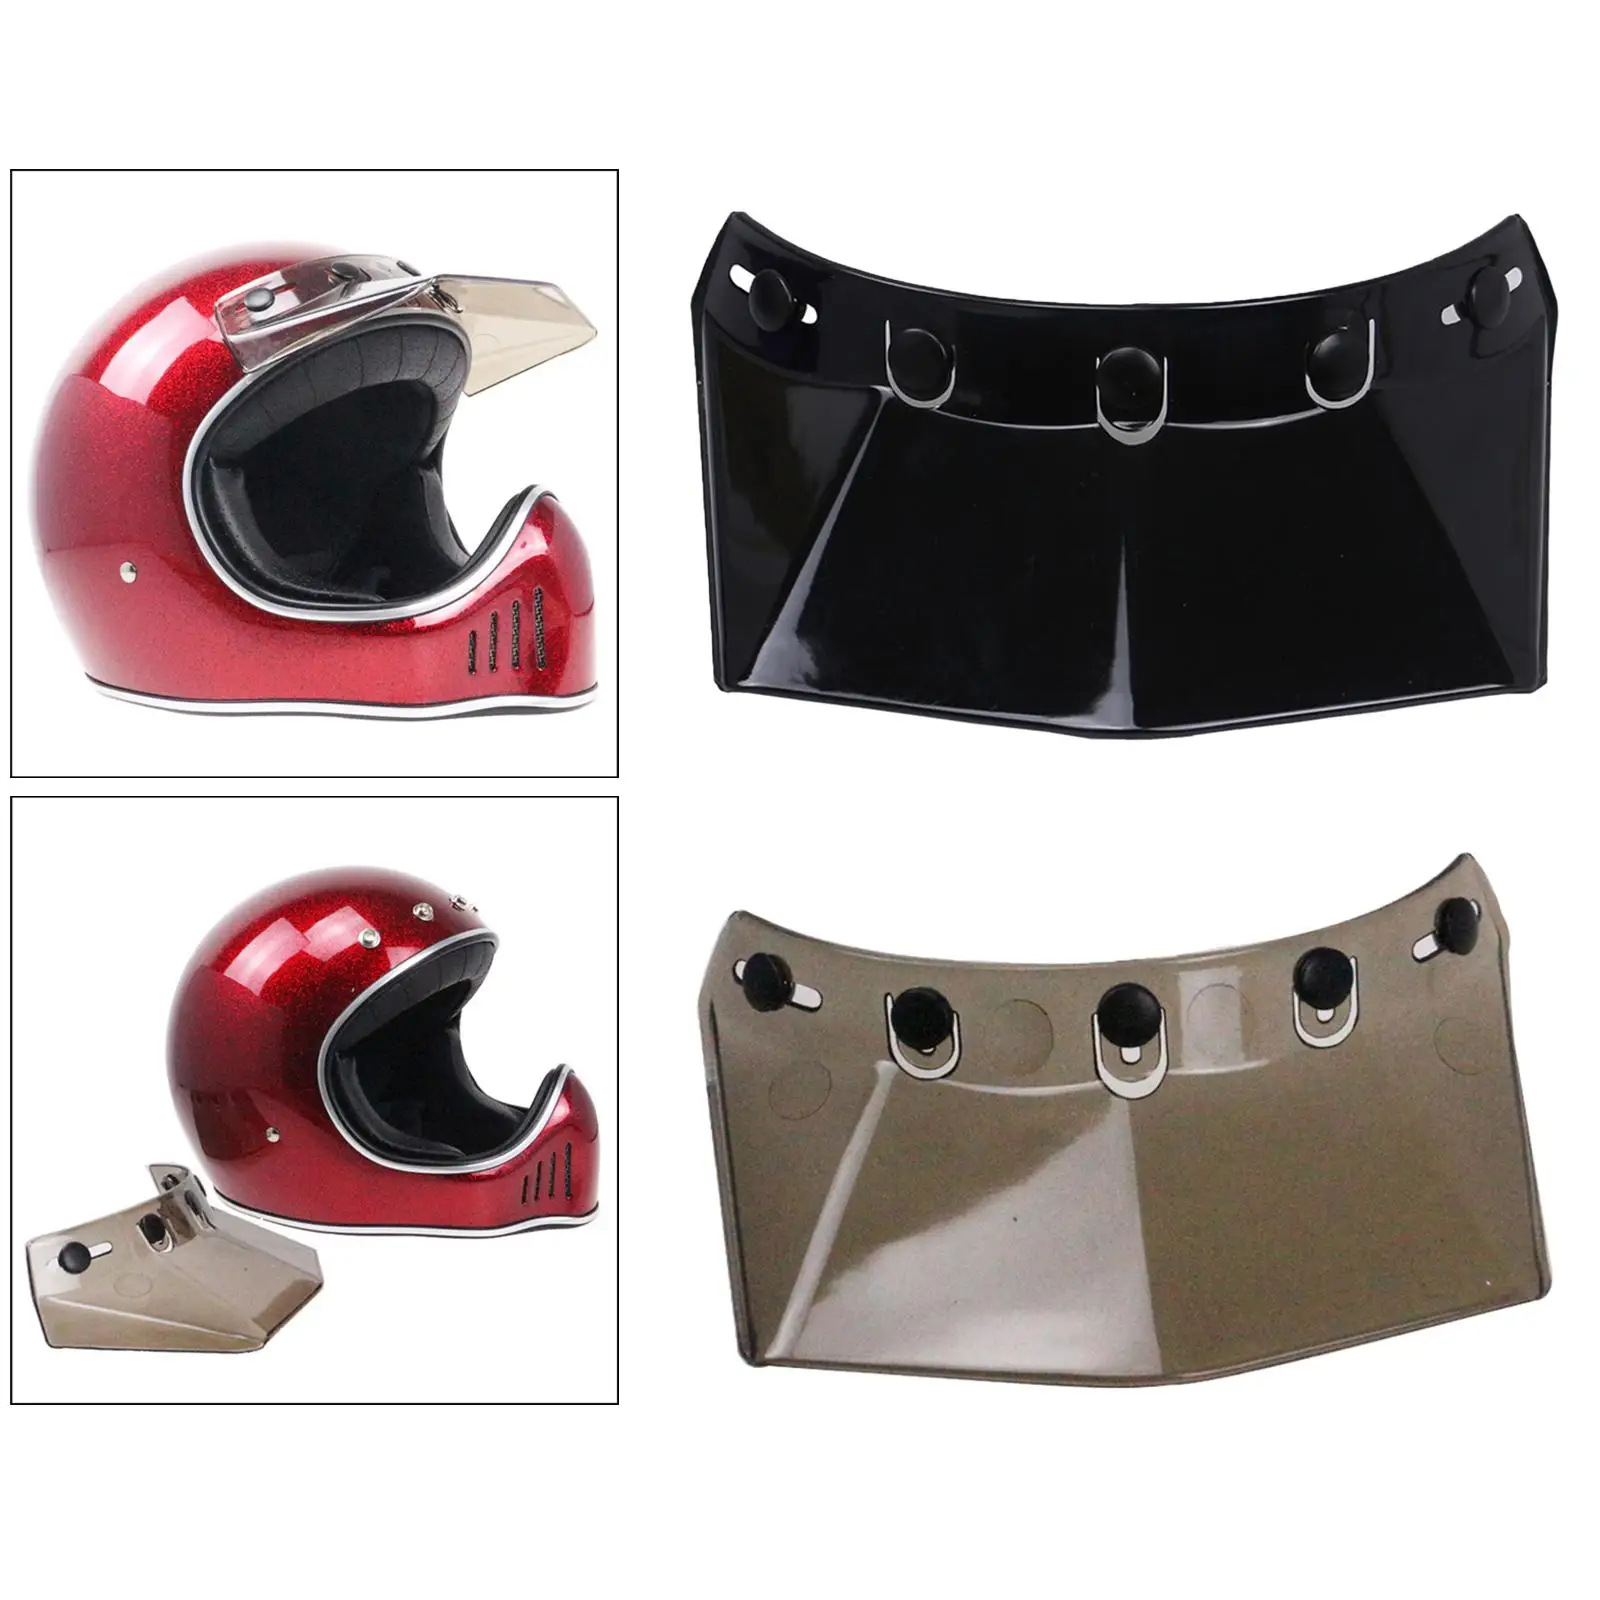 2Pcs Motorbike 5 Snap Visor Peak Replace for  Open   Motorcycle Accessories